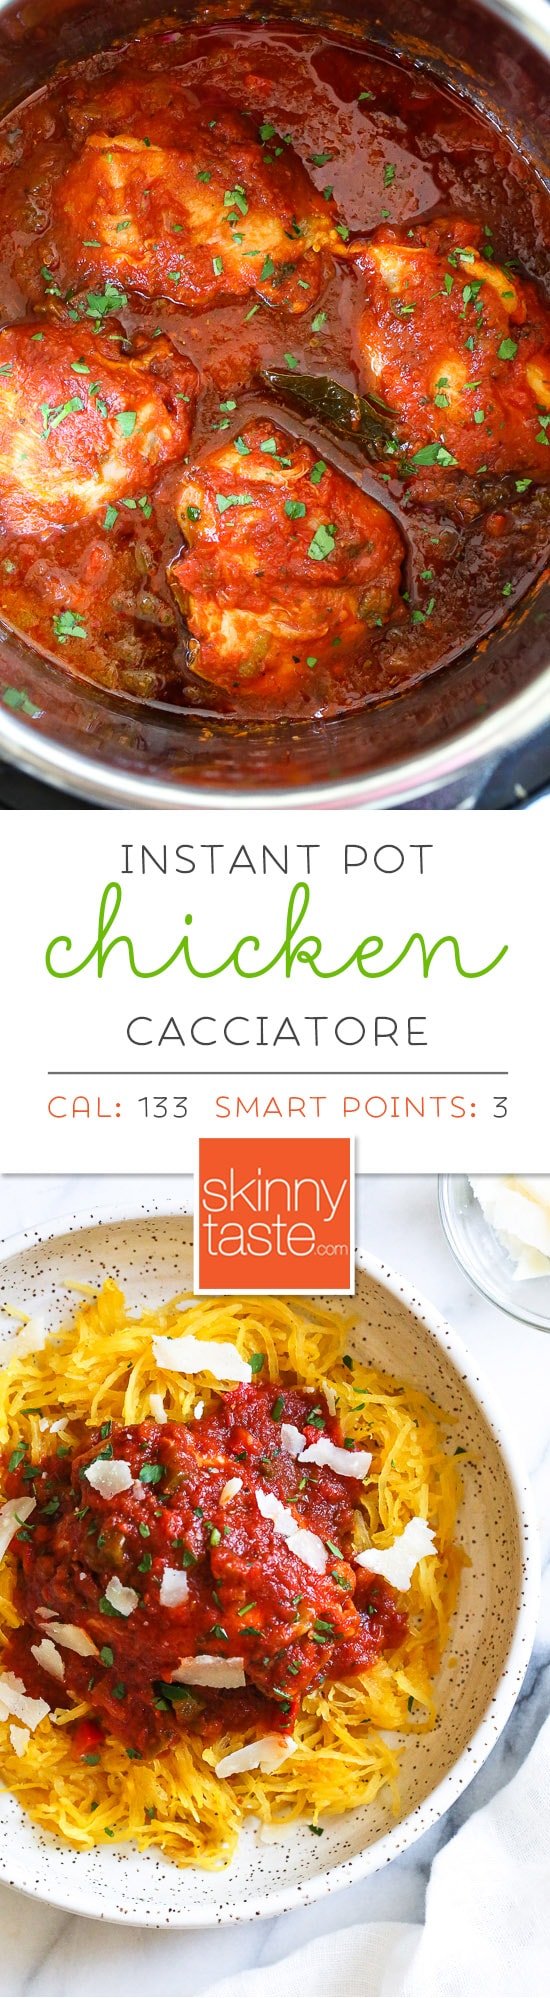 Chicken Cacciatore made in an Instant! The sauce is hearty and chunky, loaded with chicken, tomatoes, peppers and onions ( sometimes I add mushrooms too!) Great over pasta, roasted spaghetti squash, rice or polenta. I also have a slow cooker chicken cacciatore and stove top version. #chickencacciatore #instantpotchickencacciatore #pressurecookerchickencacciatore #weightwatcherschickencacciatore #chickencacciatorerecipe 